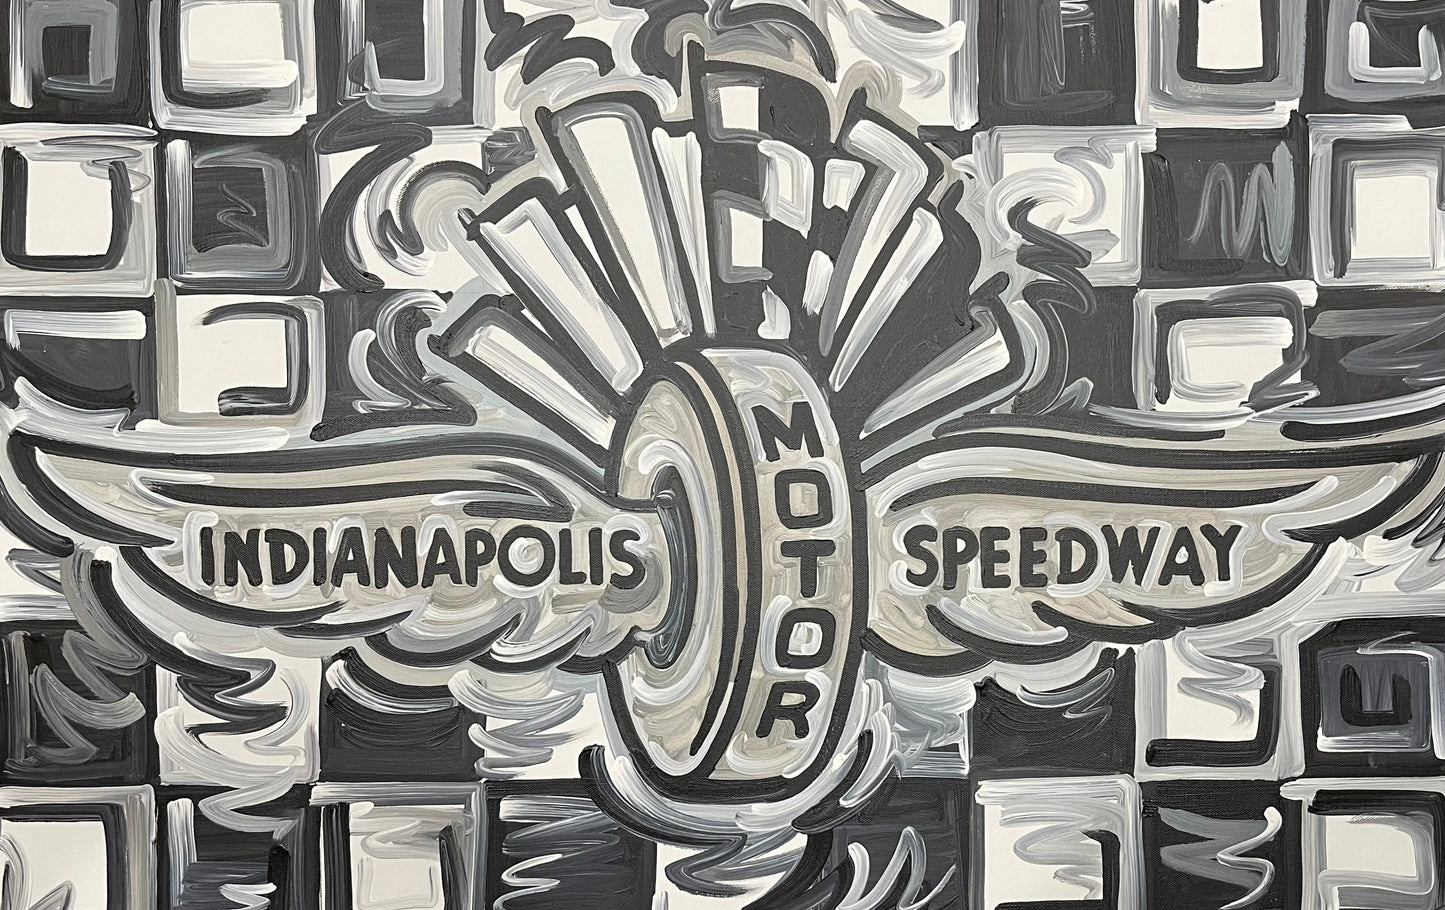 Custom Wing and Wheel B&W Checkered Painting (36" x 24") by Justin Patten